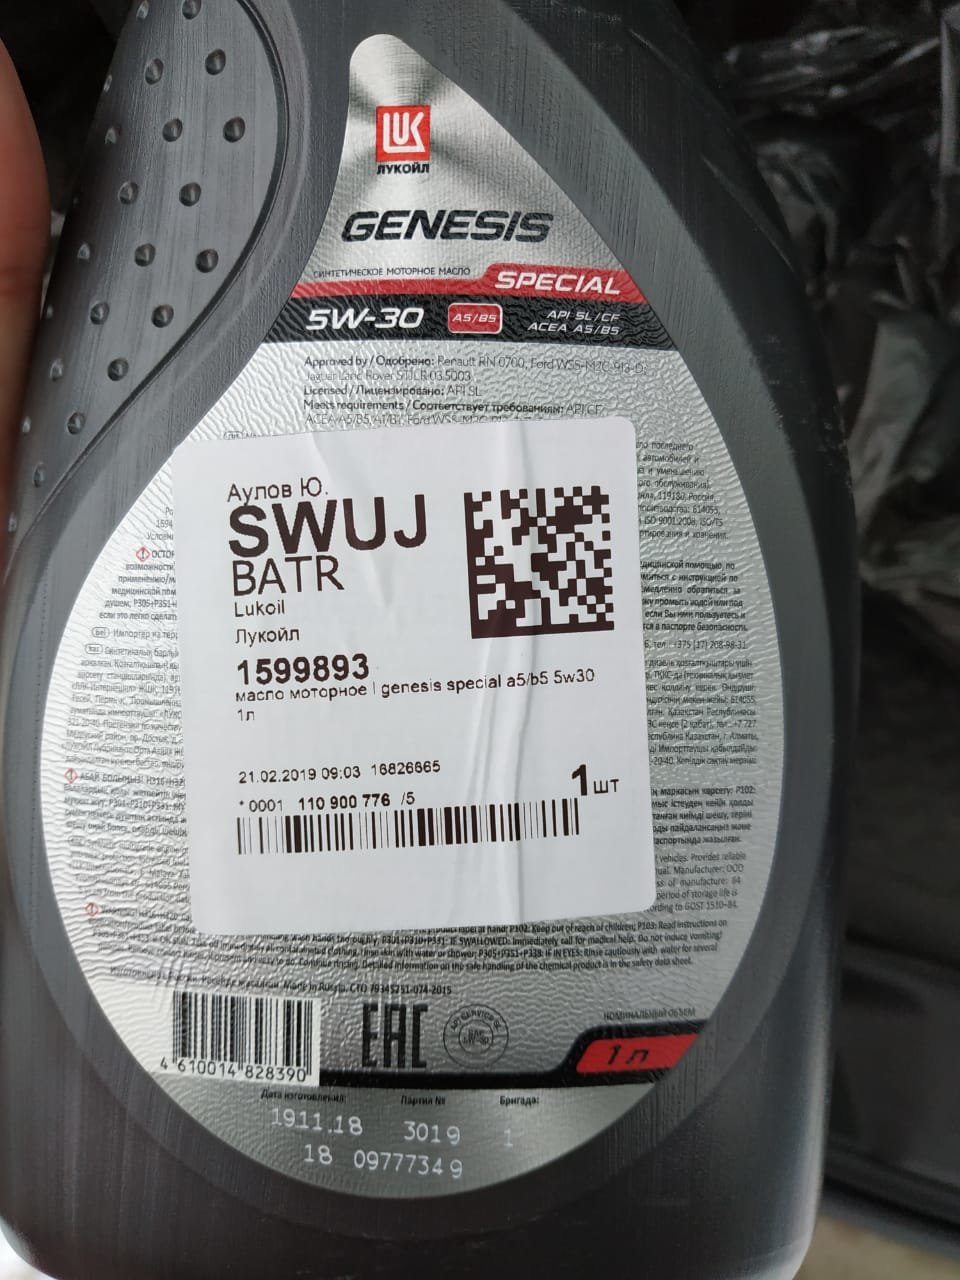 Lukoil Genesis Special a5/b5 5w-30. Лукойл Special 5w30 a5 b5.